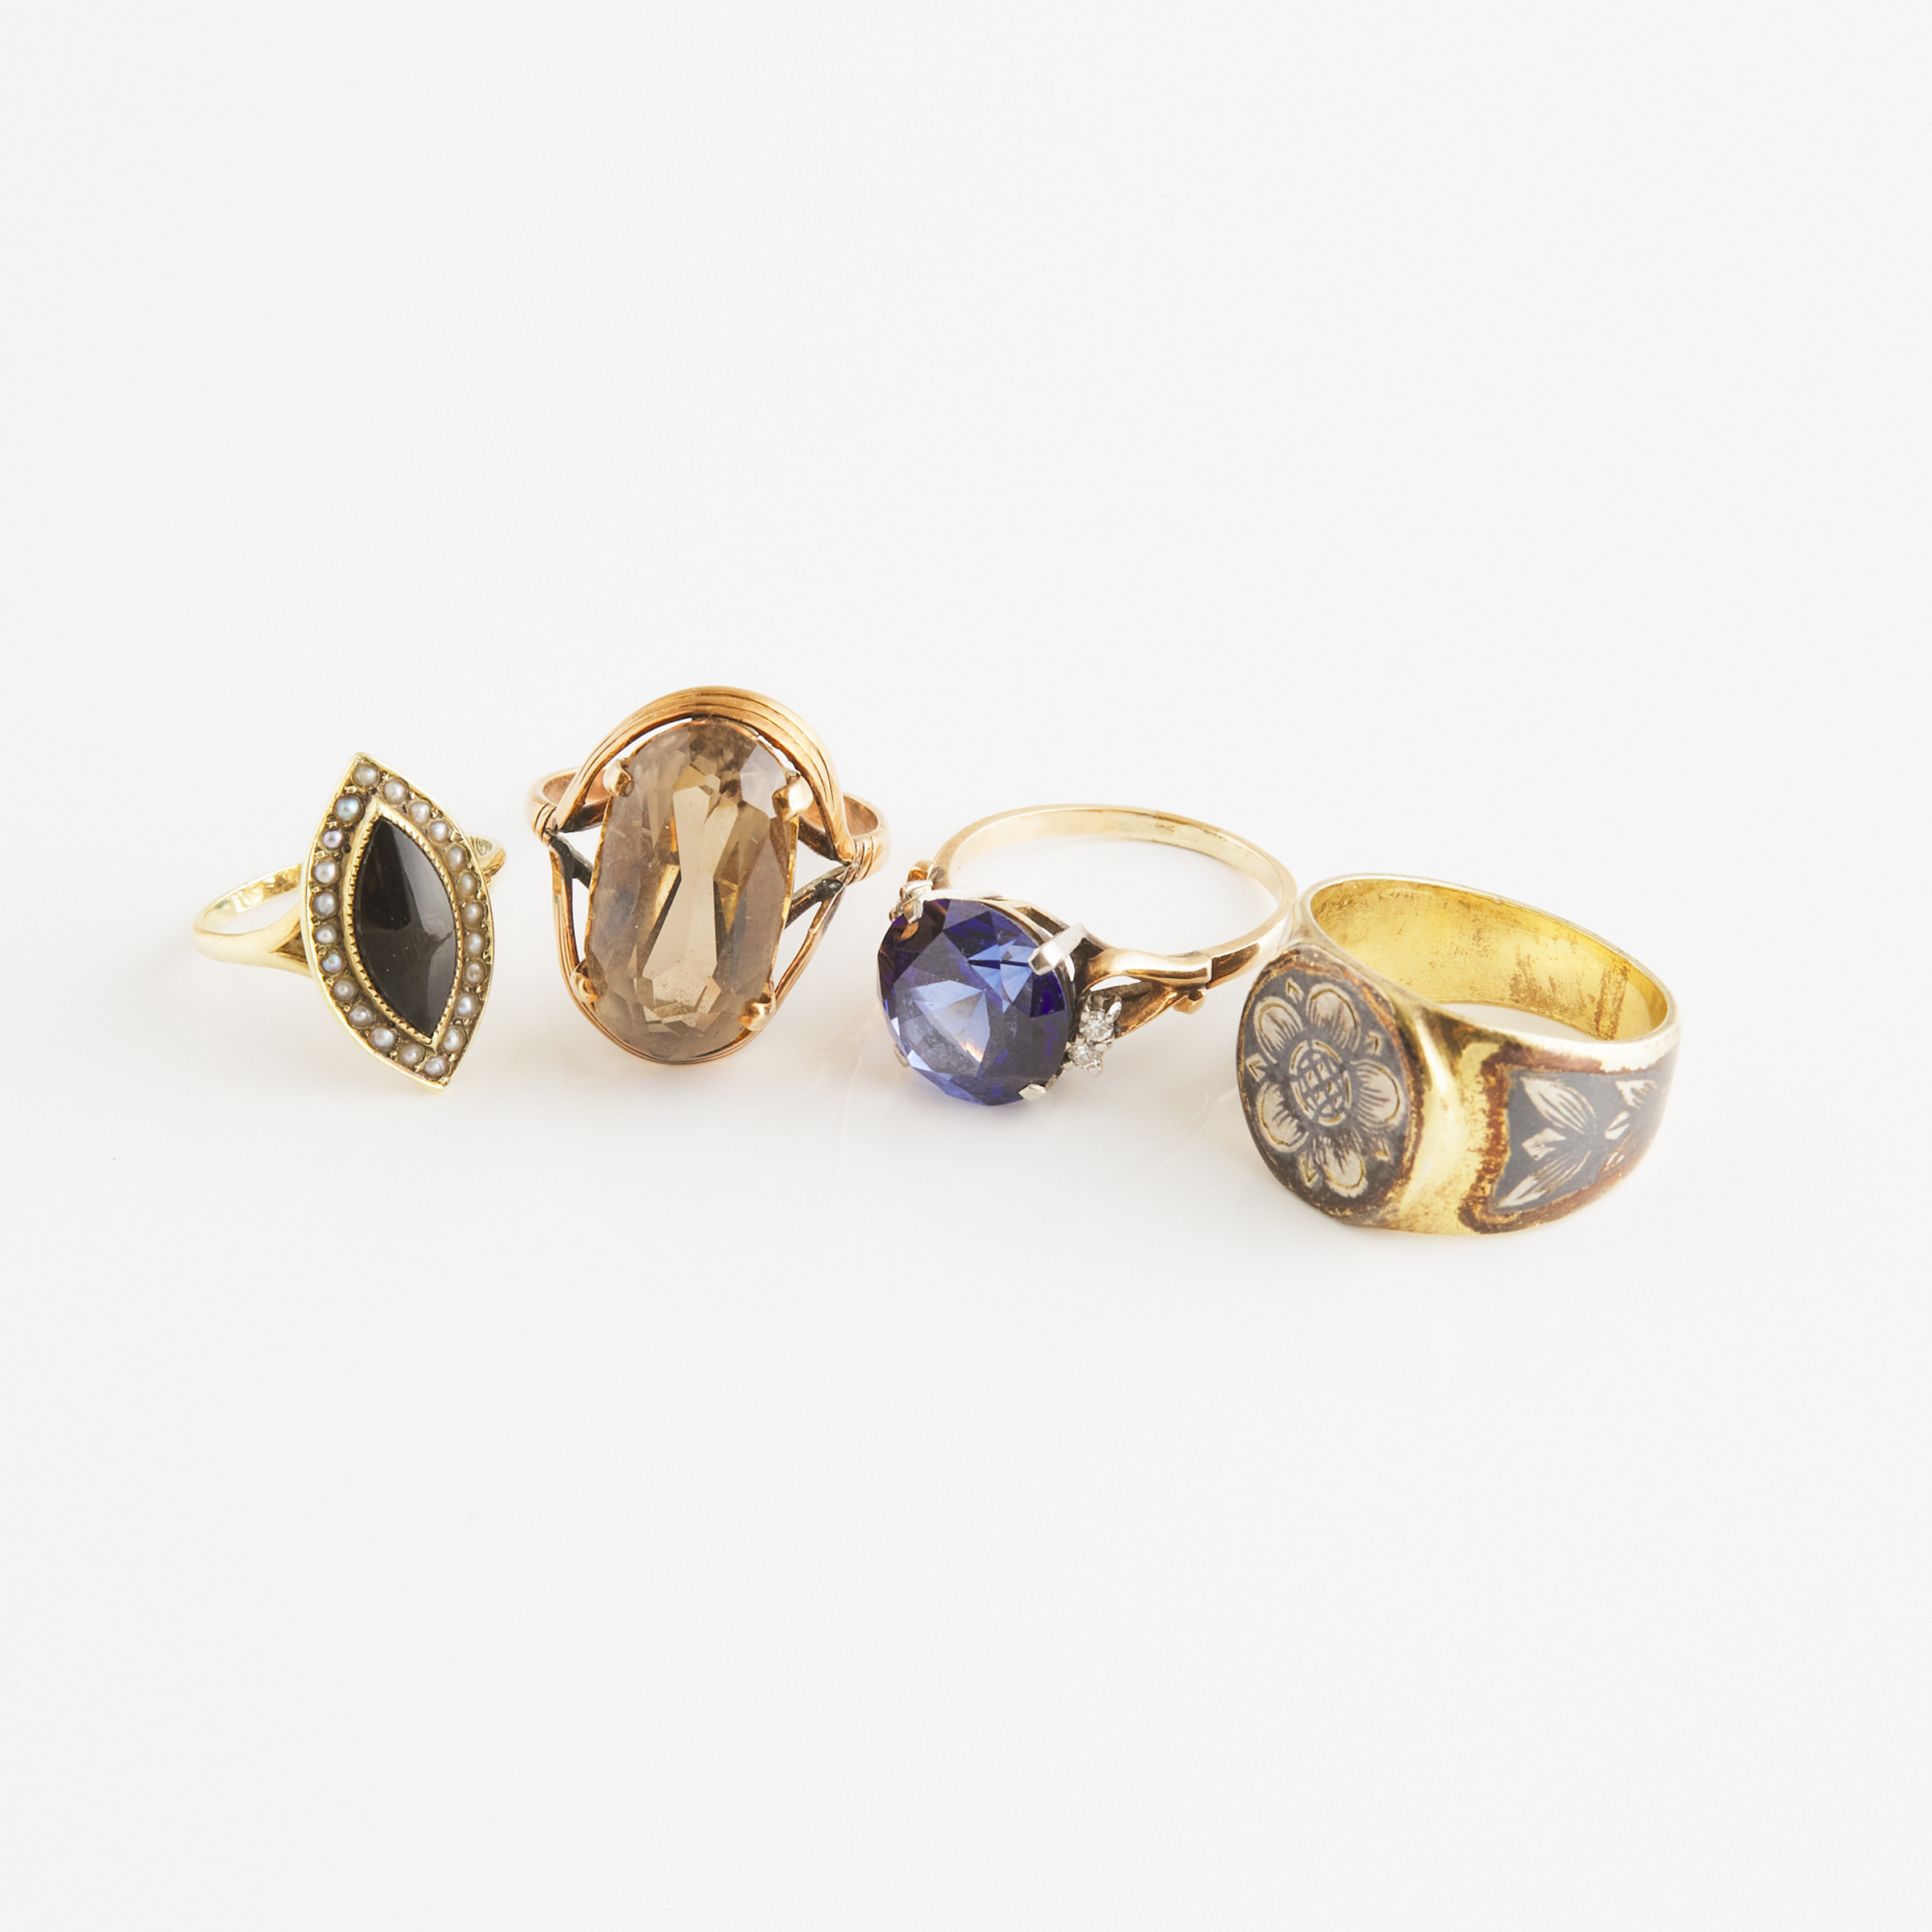 3 Various Yellow Gold And Silver Rings